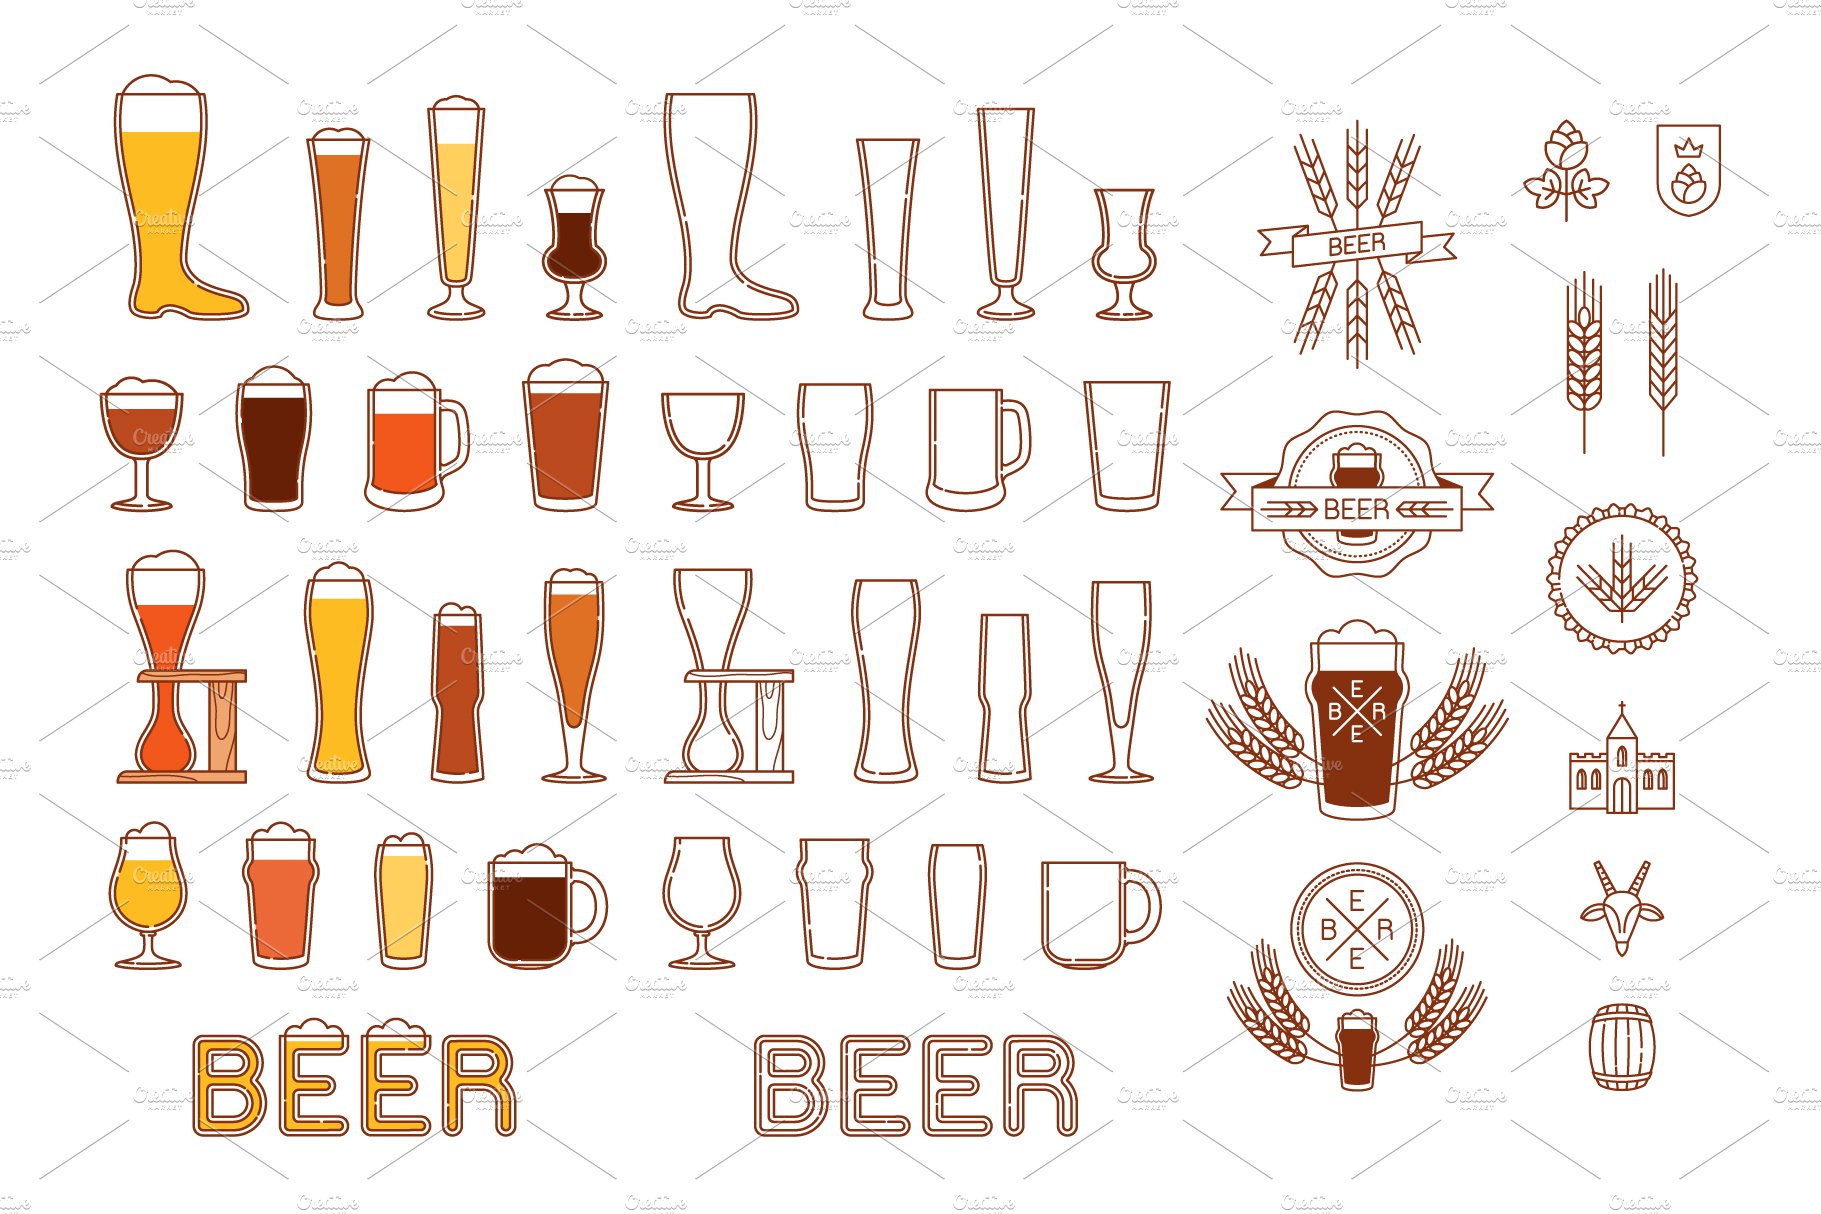 Beer items in the different styles.